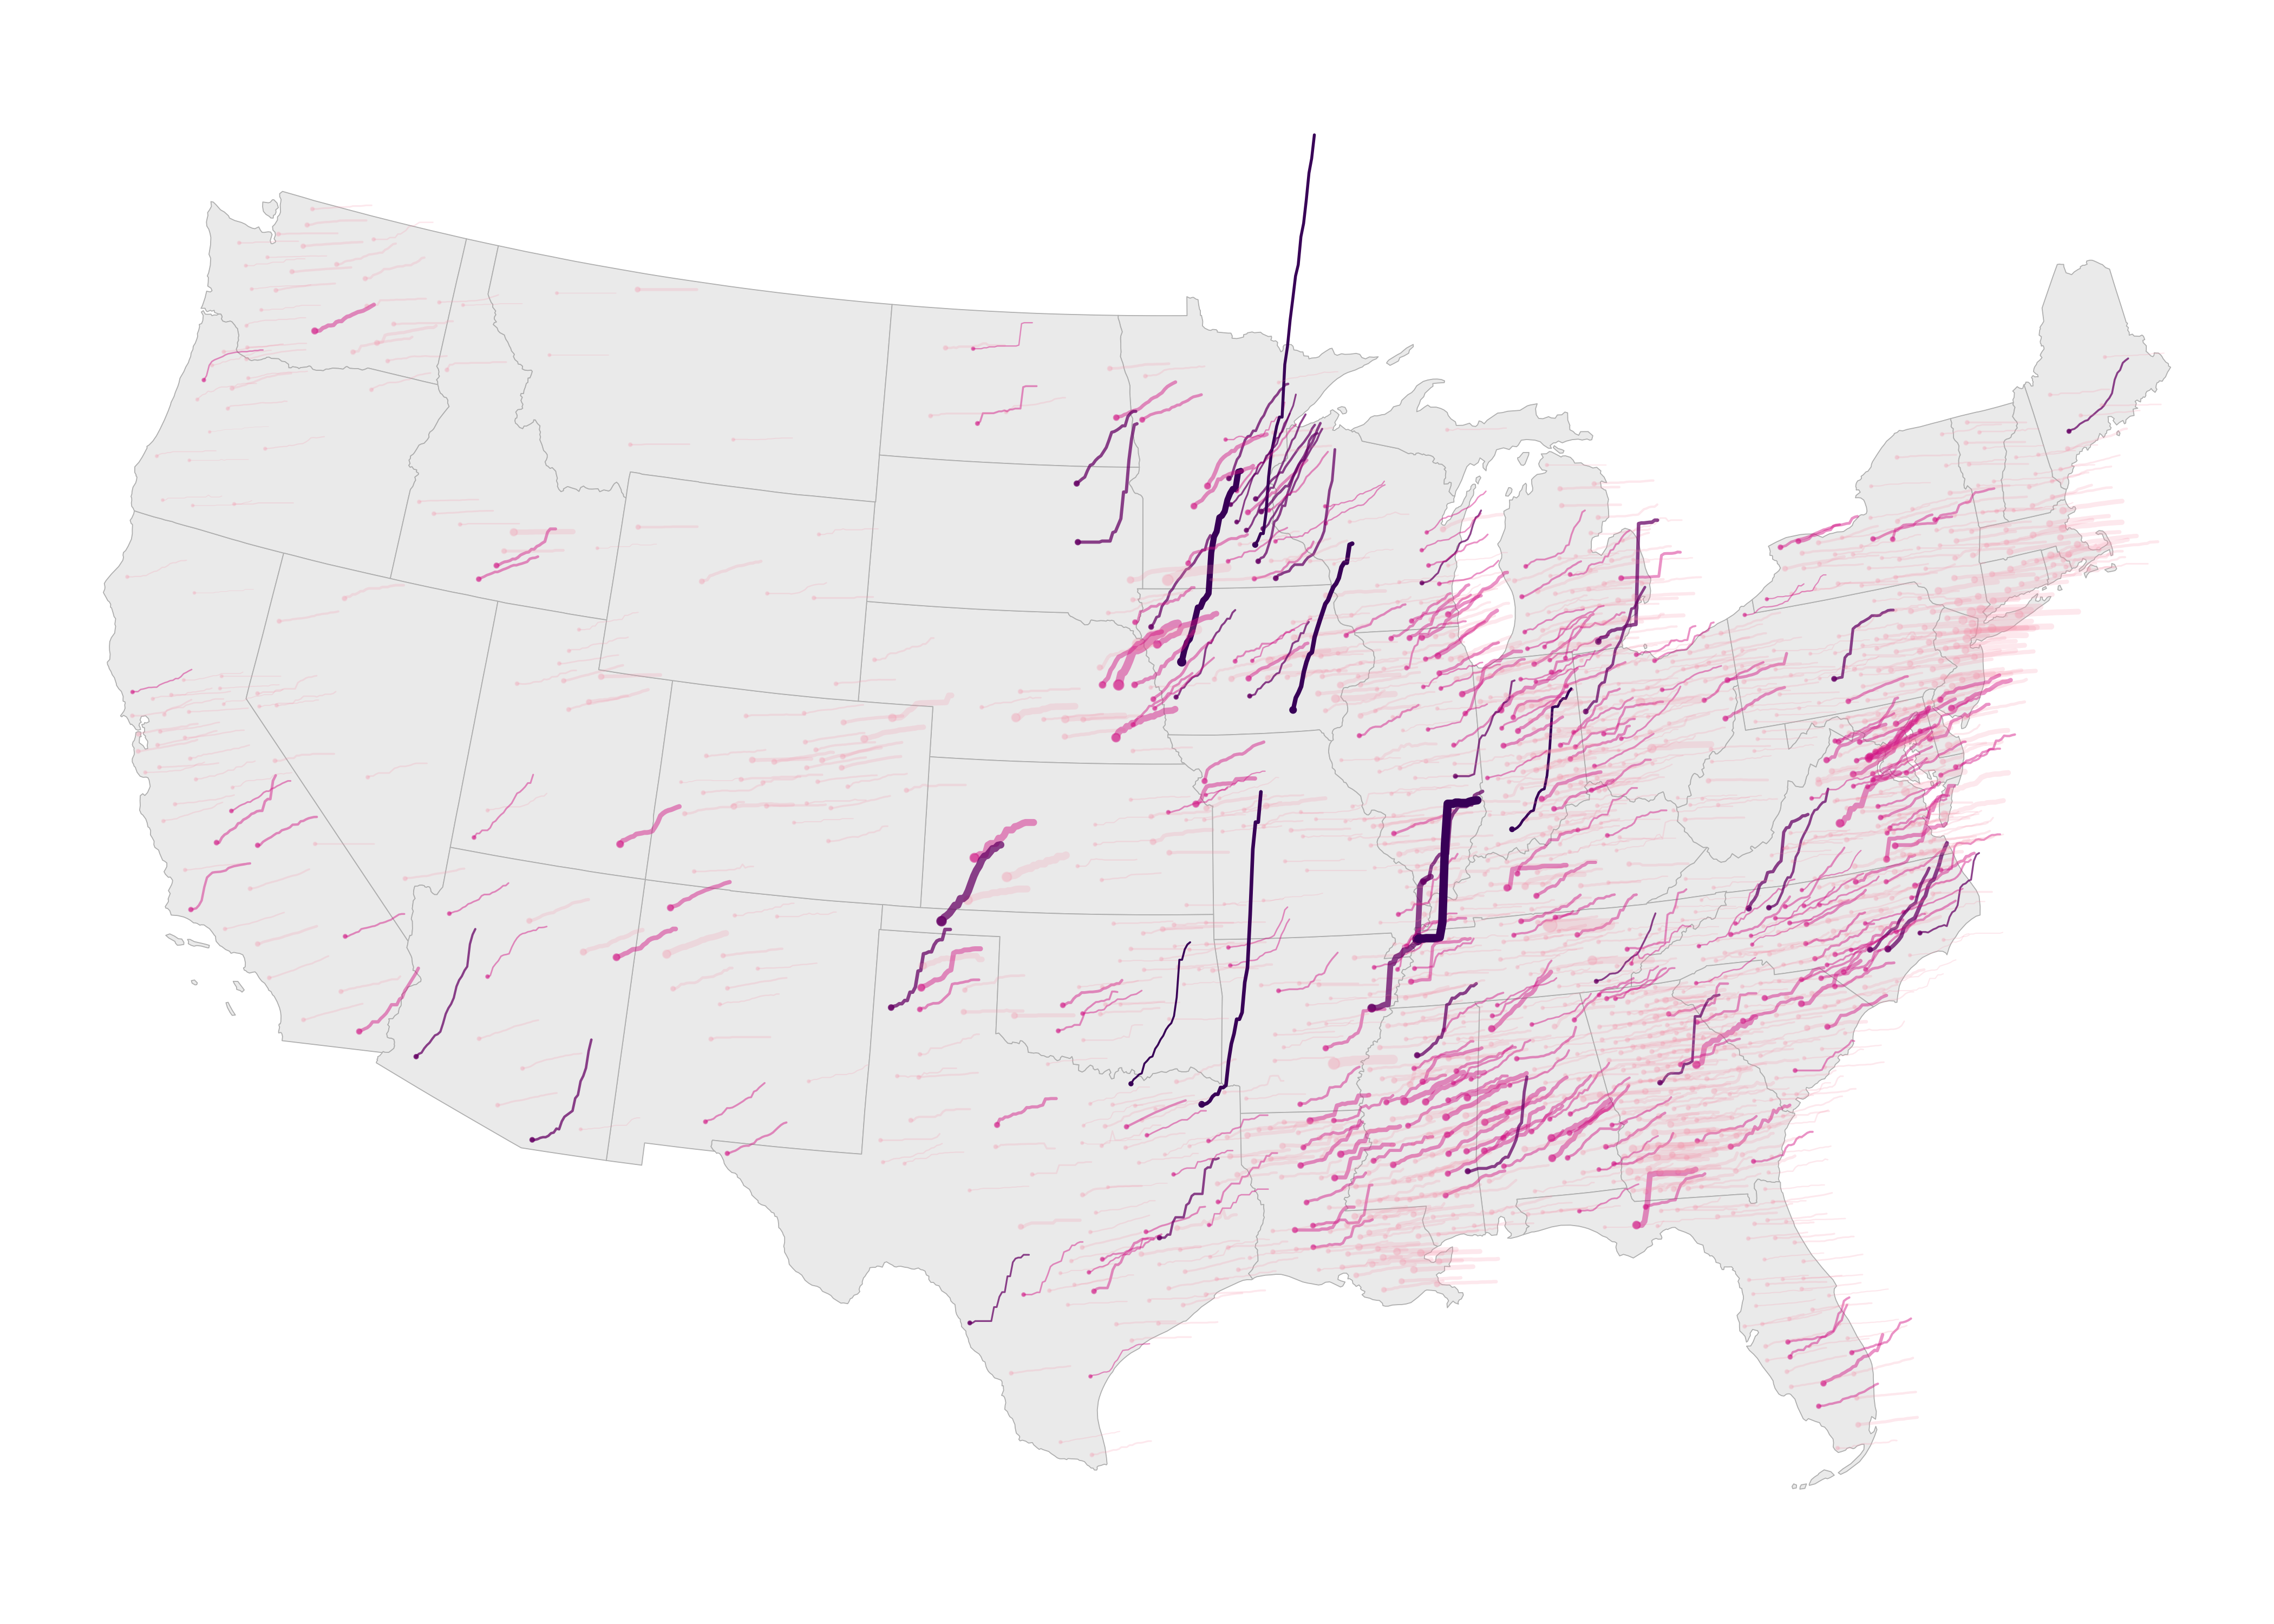 Glyphmap design displaying growth in COVID-19 cases by US county, without legend and annotations.